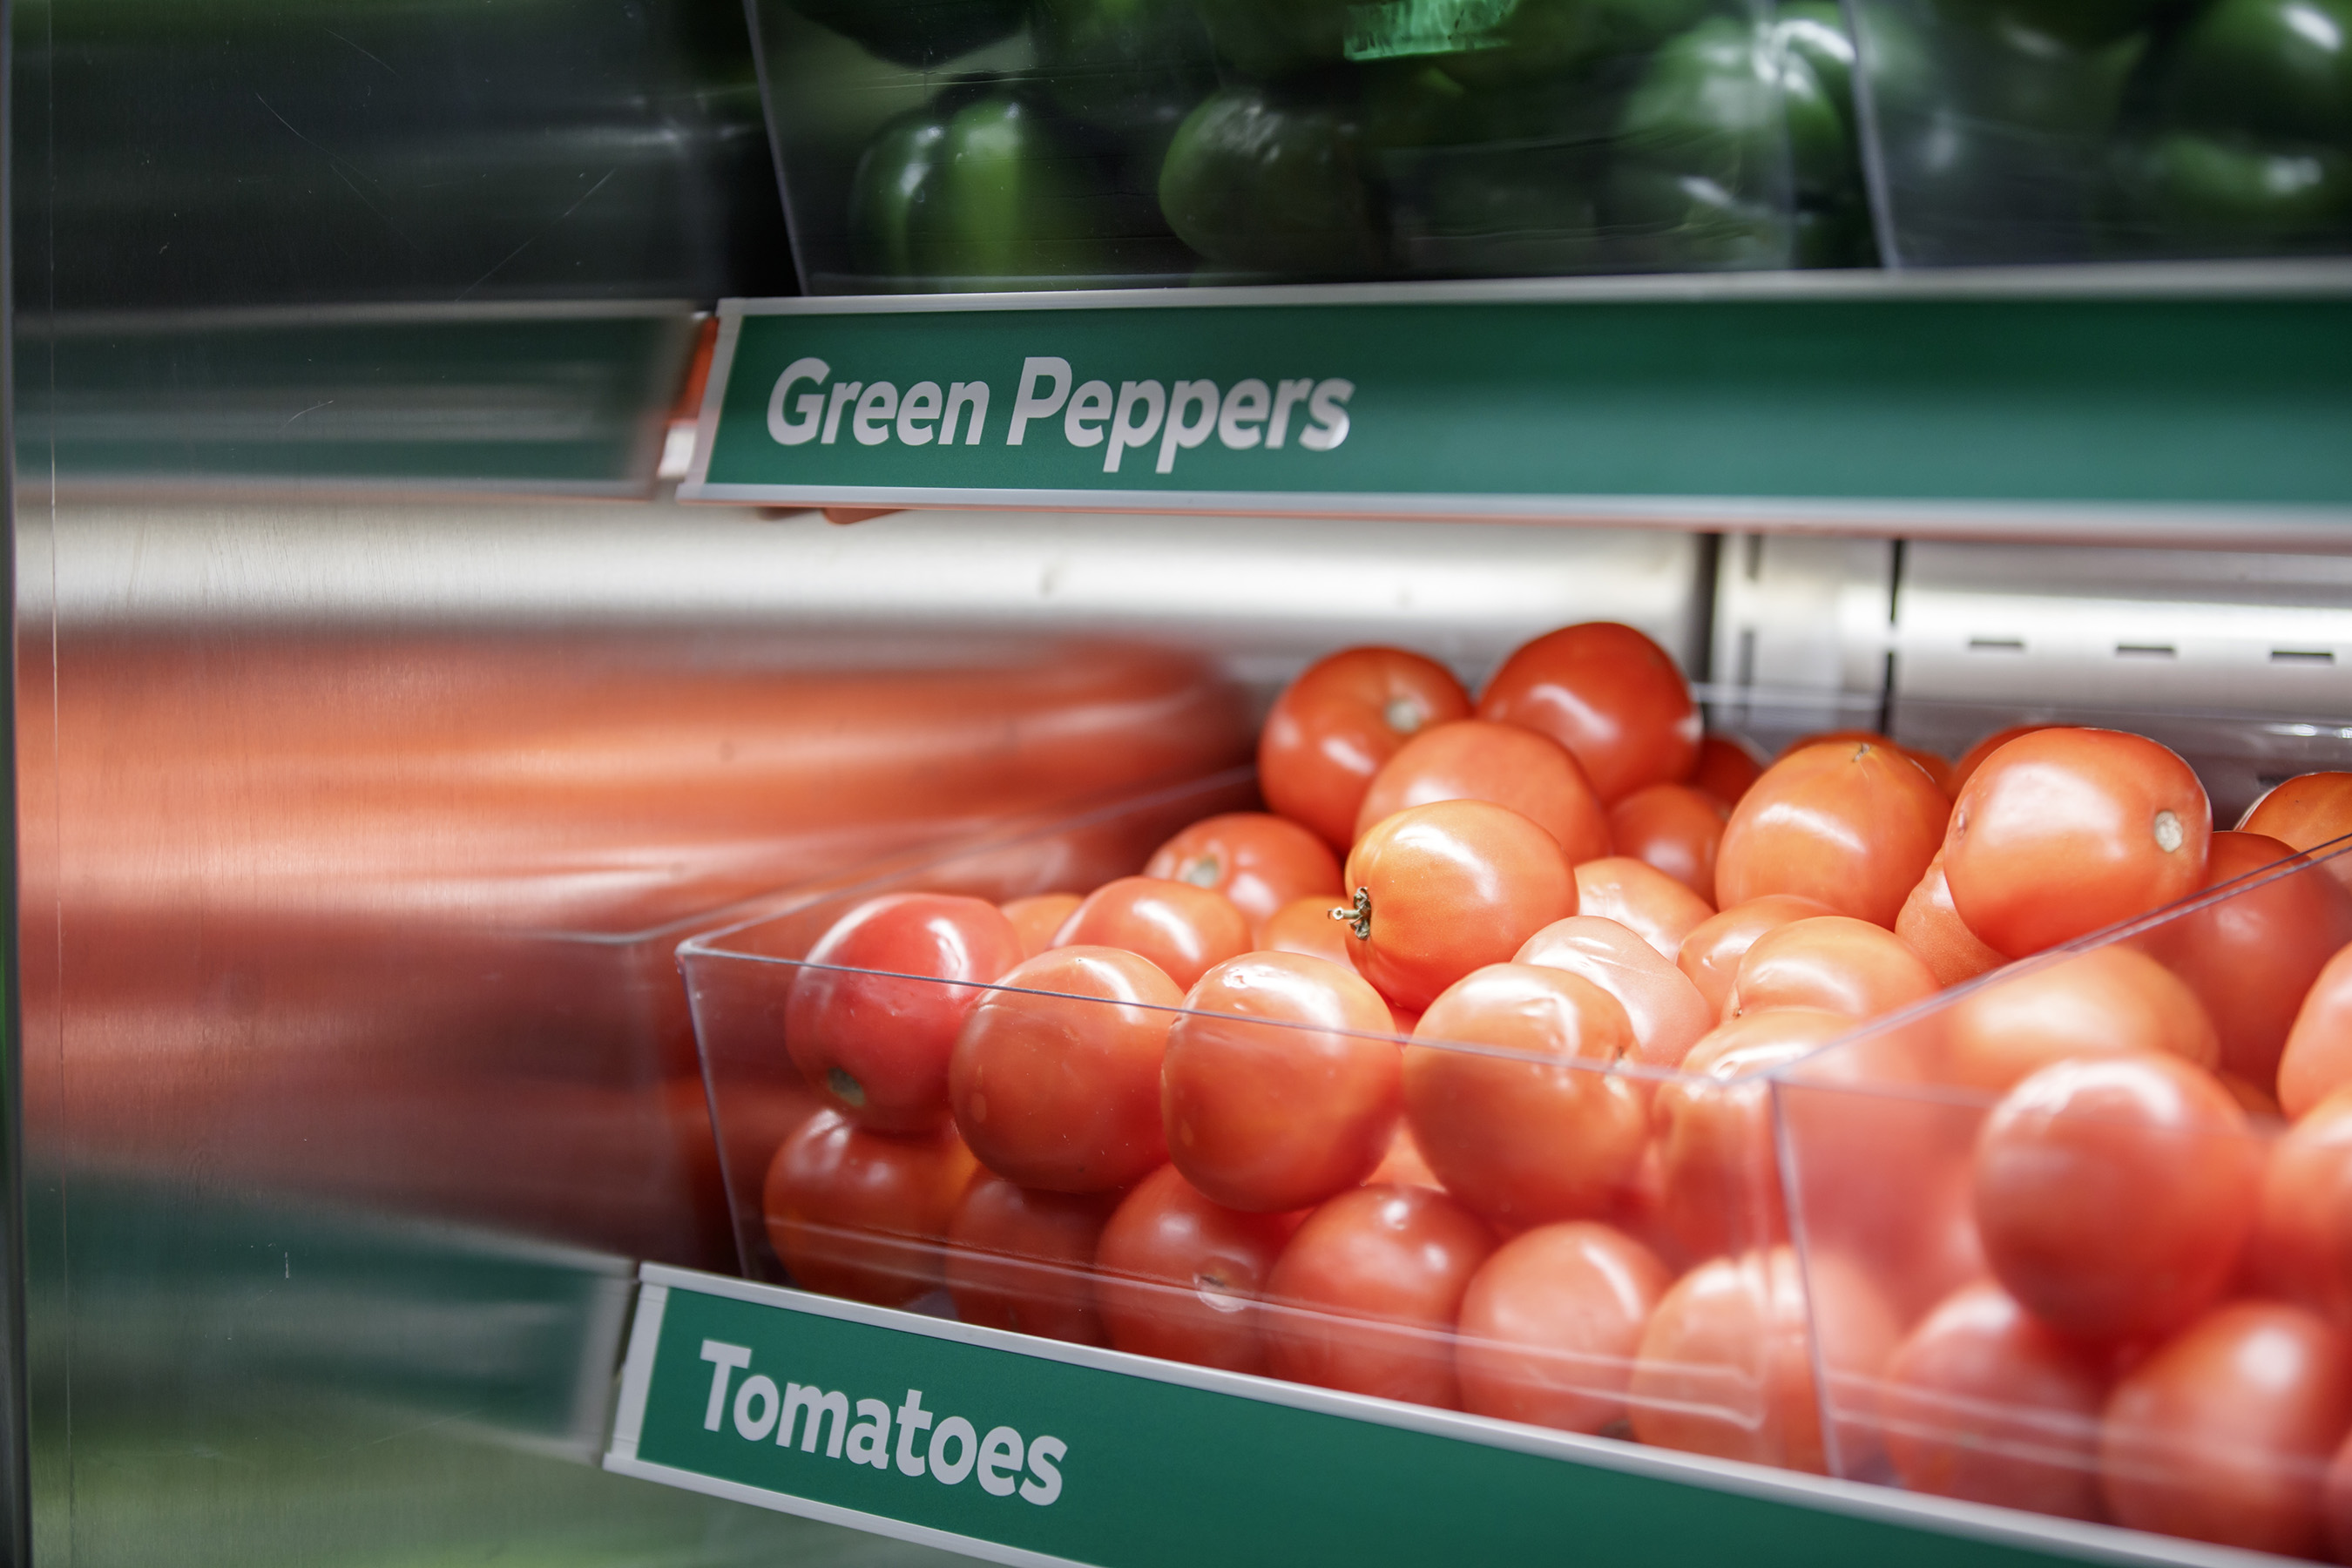 Fresh veggies - whole tomatoes, green peppers, onions and cucumbers - that are sliced daily are highlighted in modern food displays.